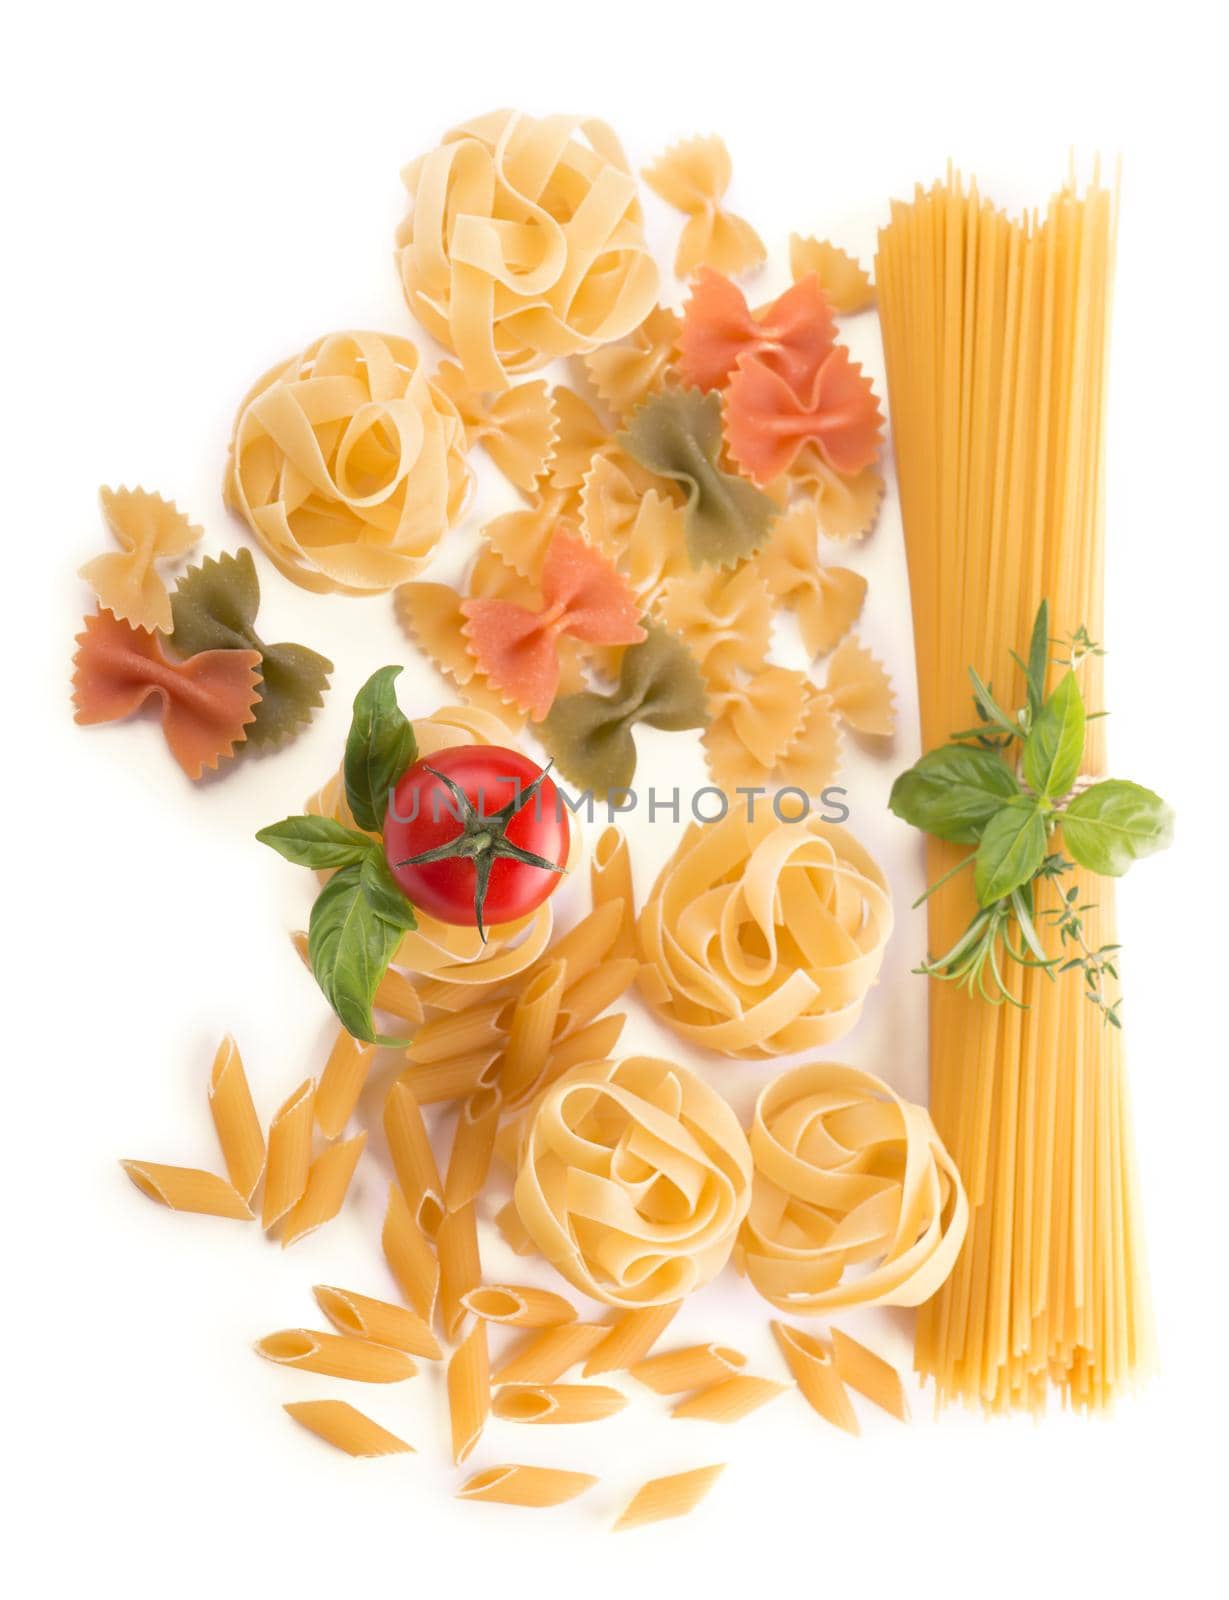 Spaghetti and basil isolated on white background by aprilphoto